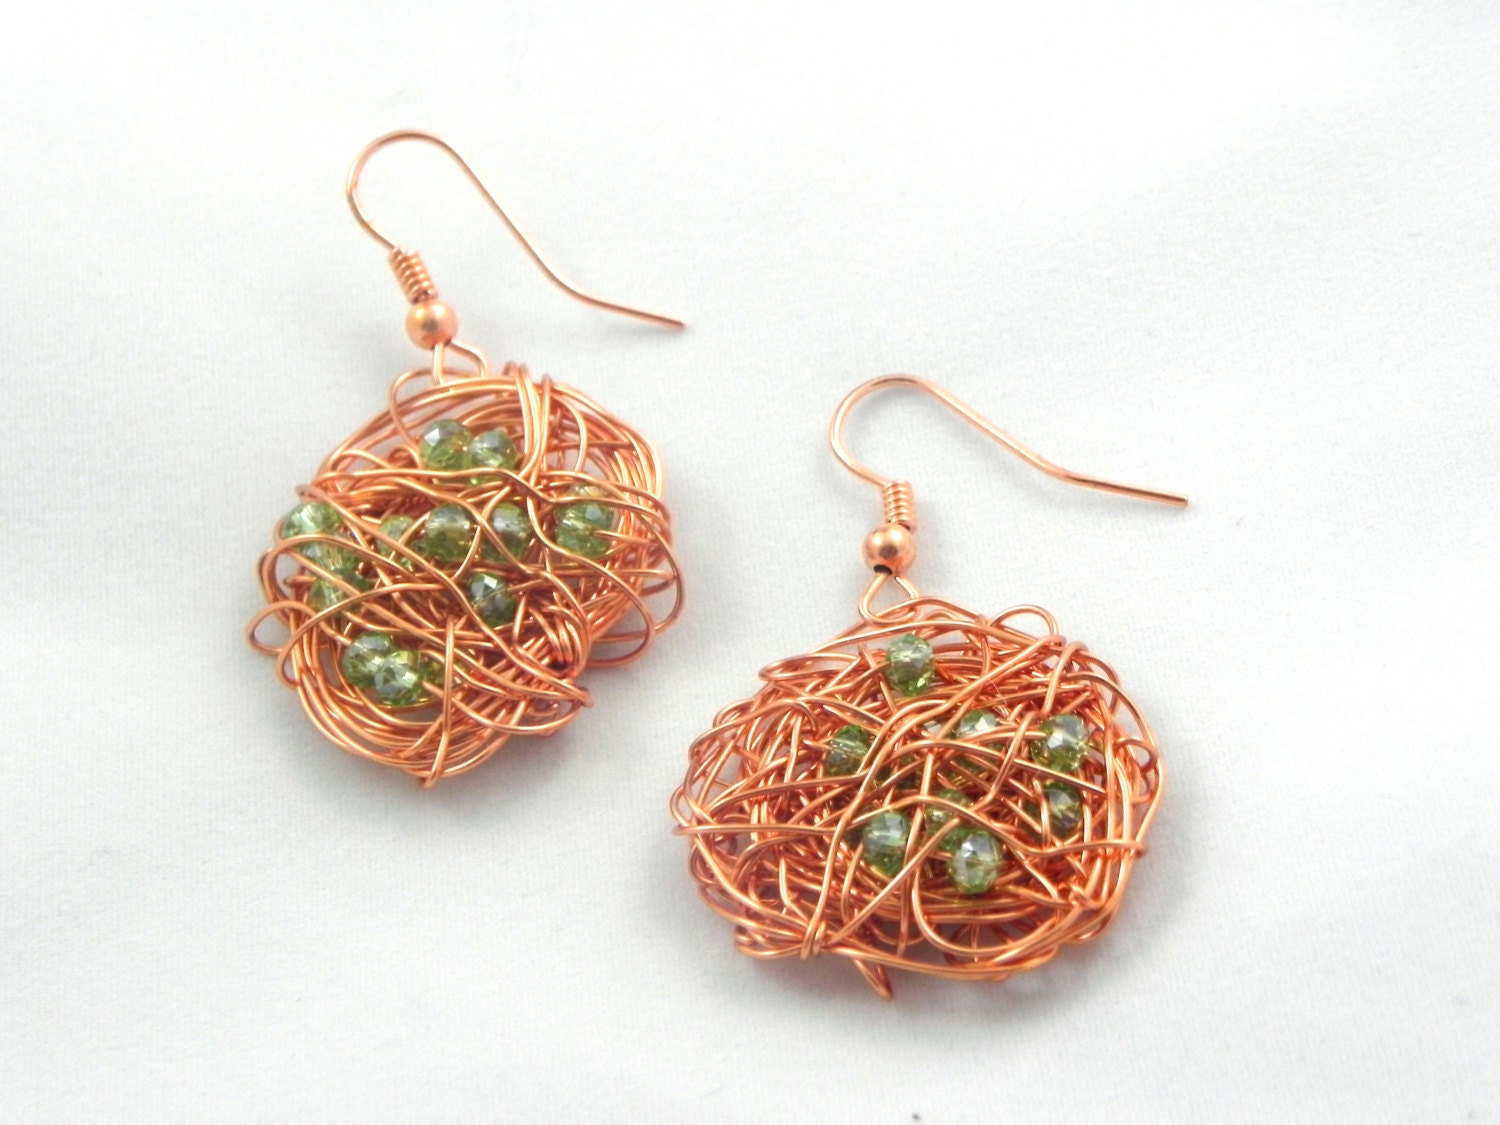 copper wire wrapped earring with mint green glass bead detail, bird nest earring, rose gold earring - MyALaModeBoutique